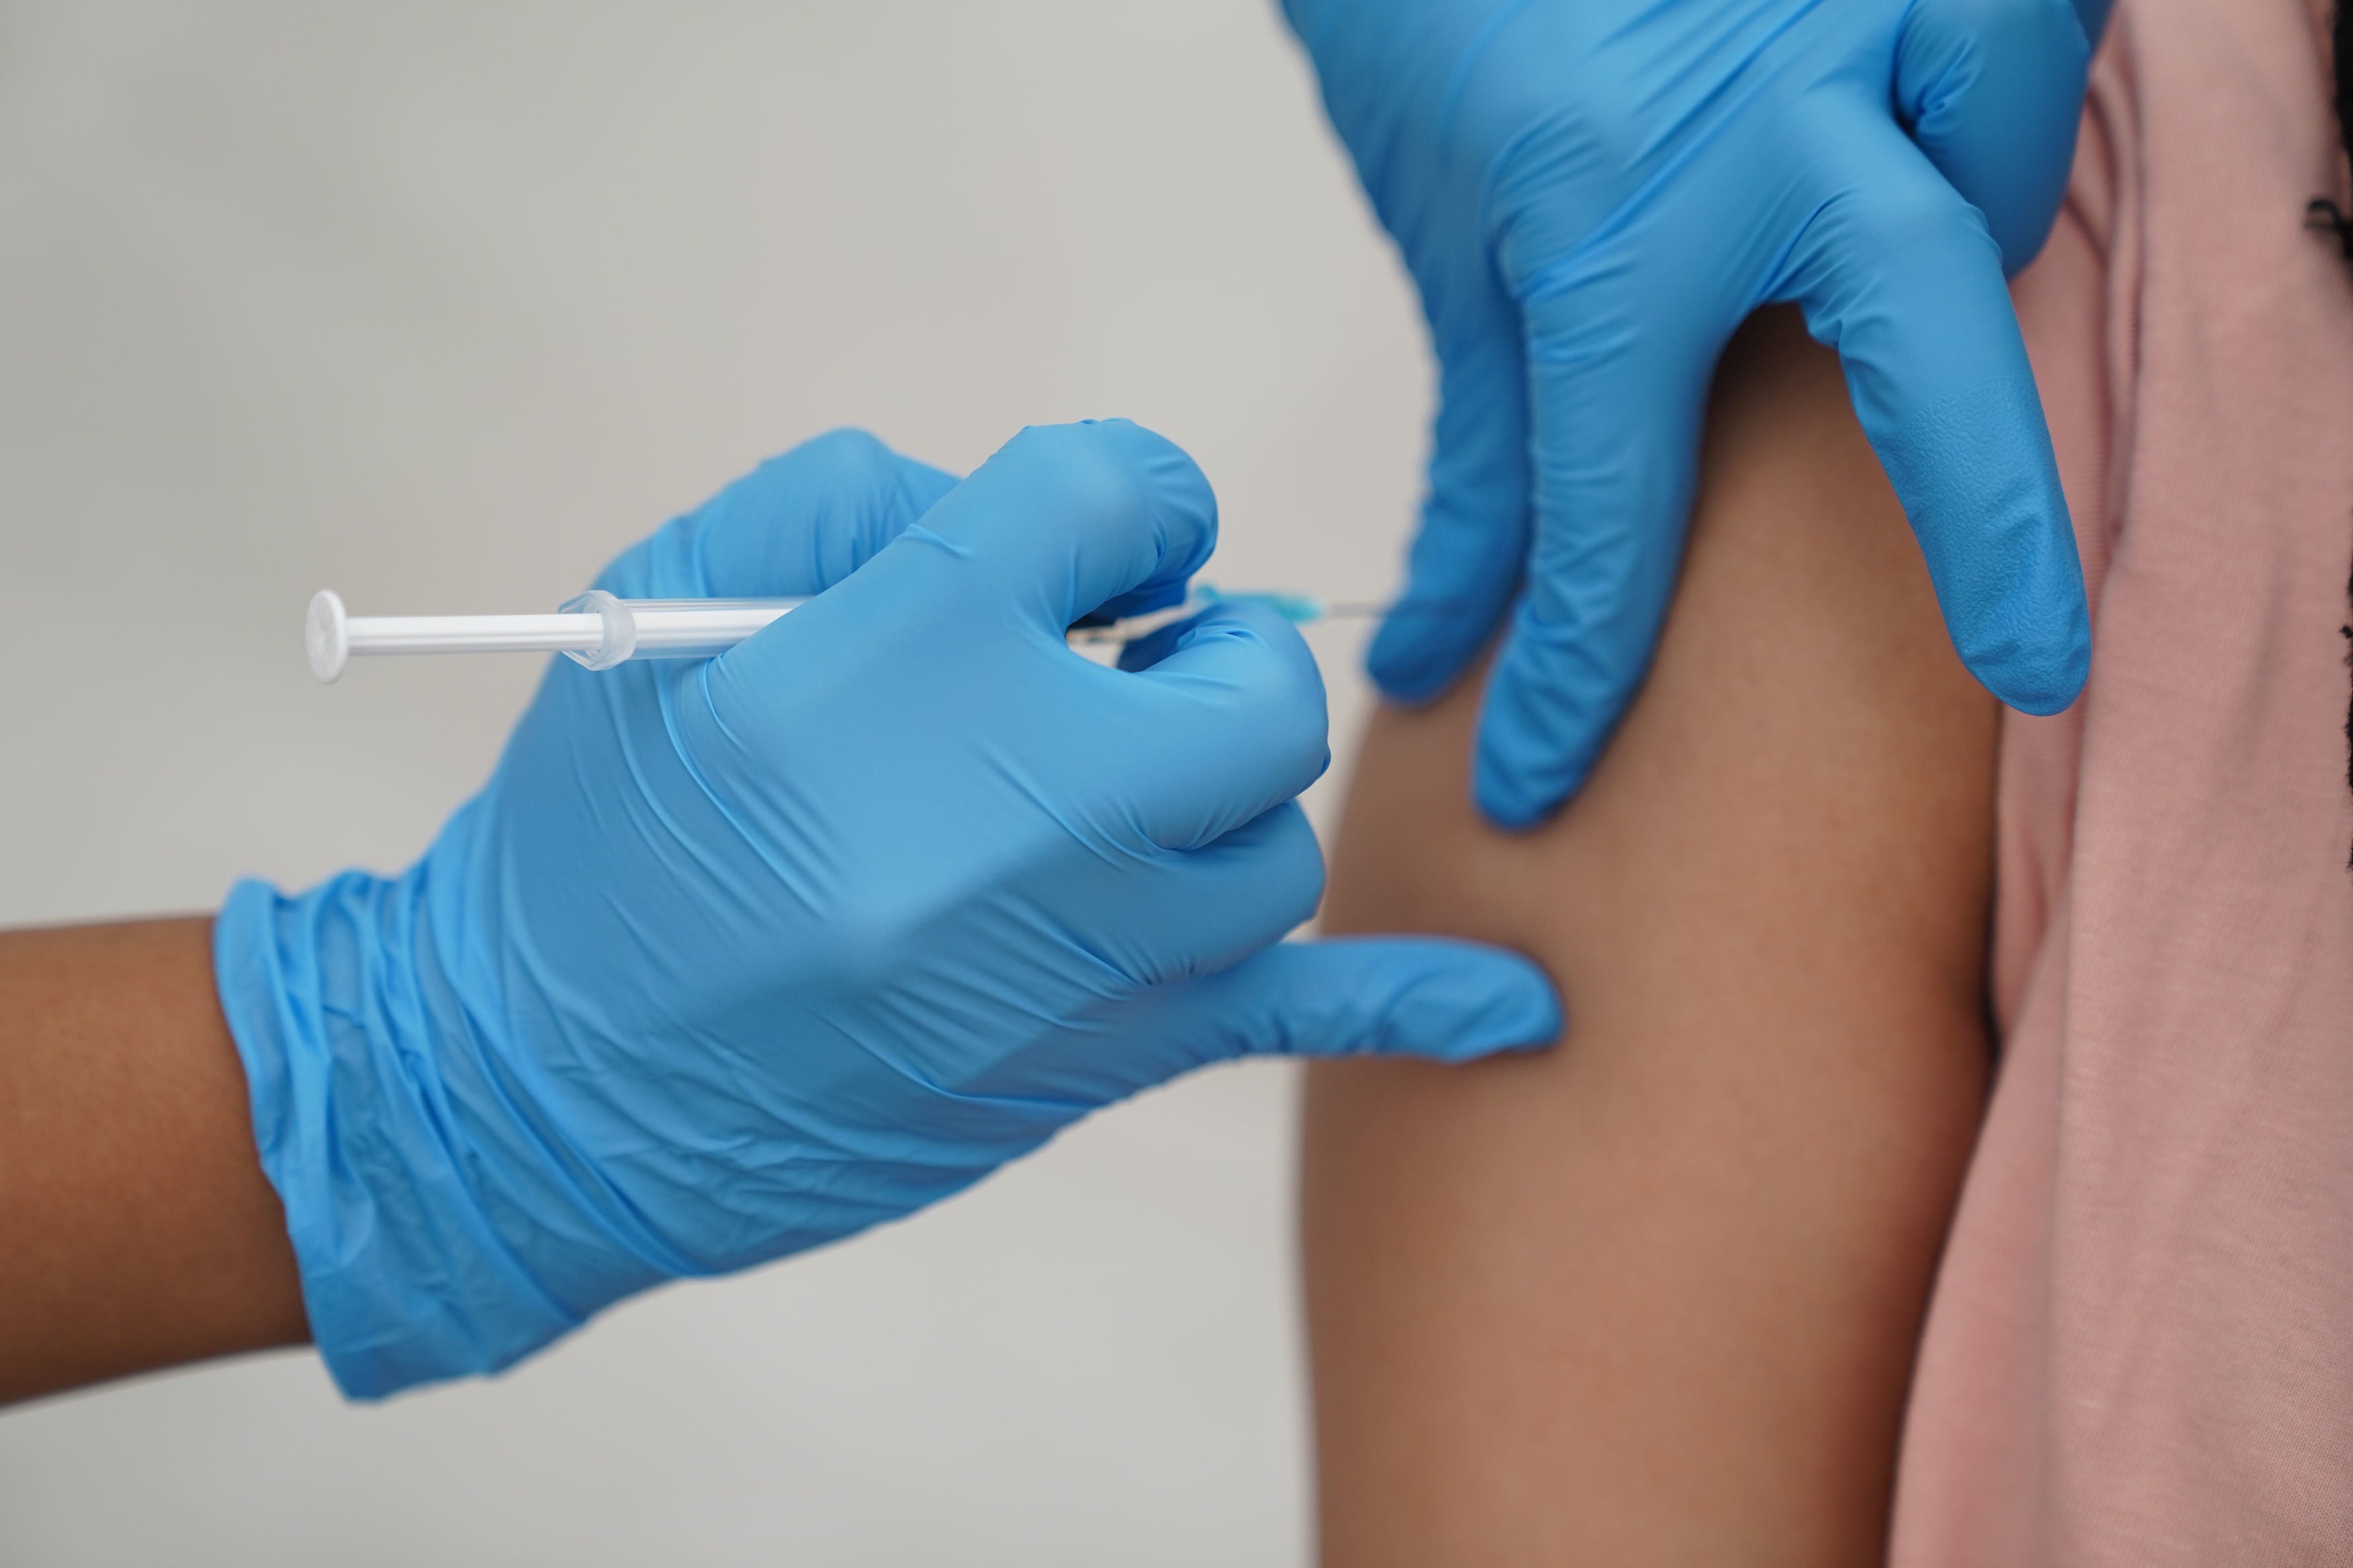 Vaccination rates have fallen to their lowest rate since they first became available